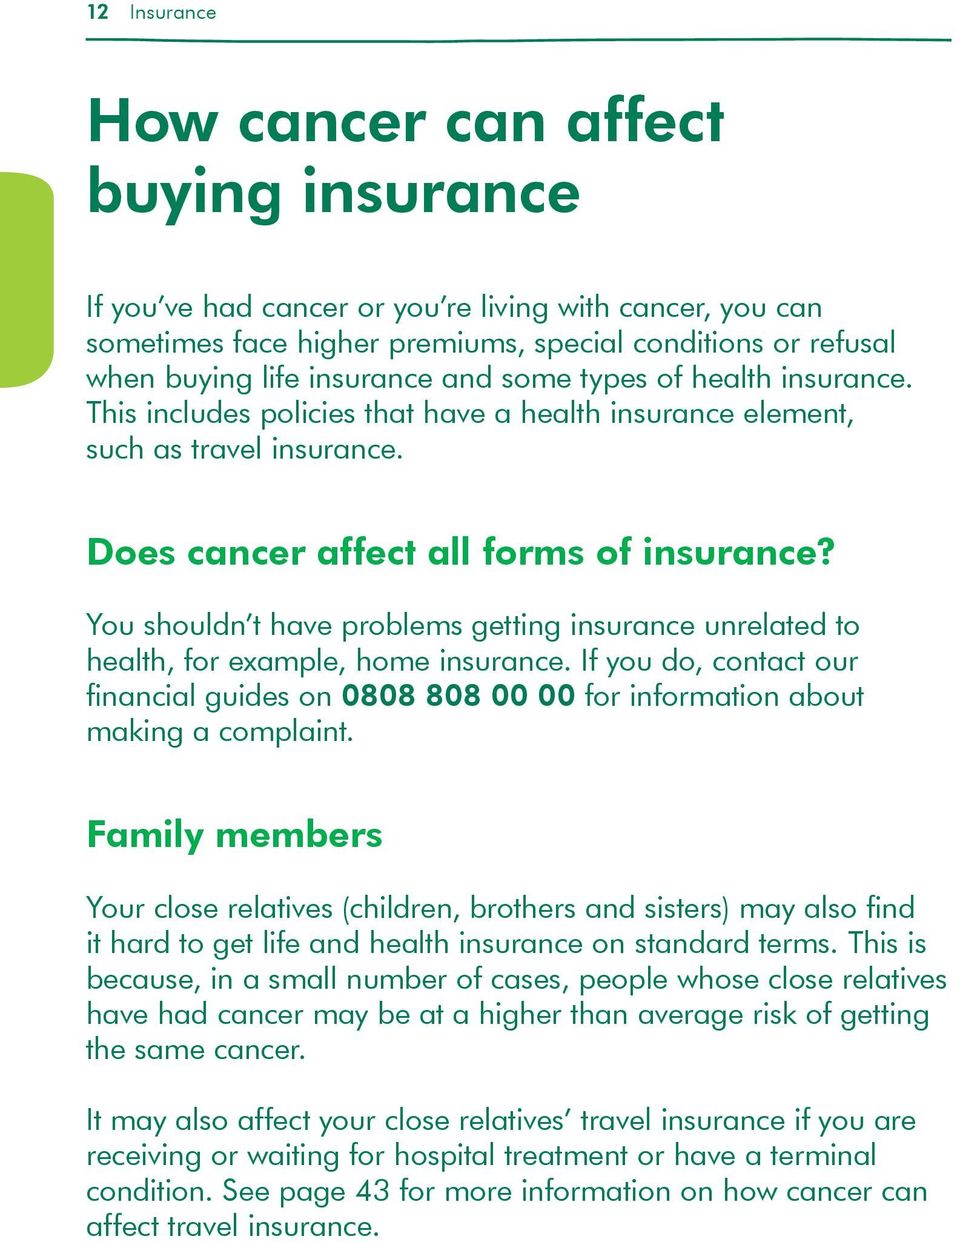 You shouldn t have problems getting insurance unrelated to health, for example, home insurance. If you do, contact our financial guides on 0808 808 00 00 for information about making a complaint.